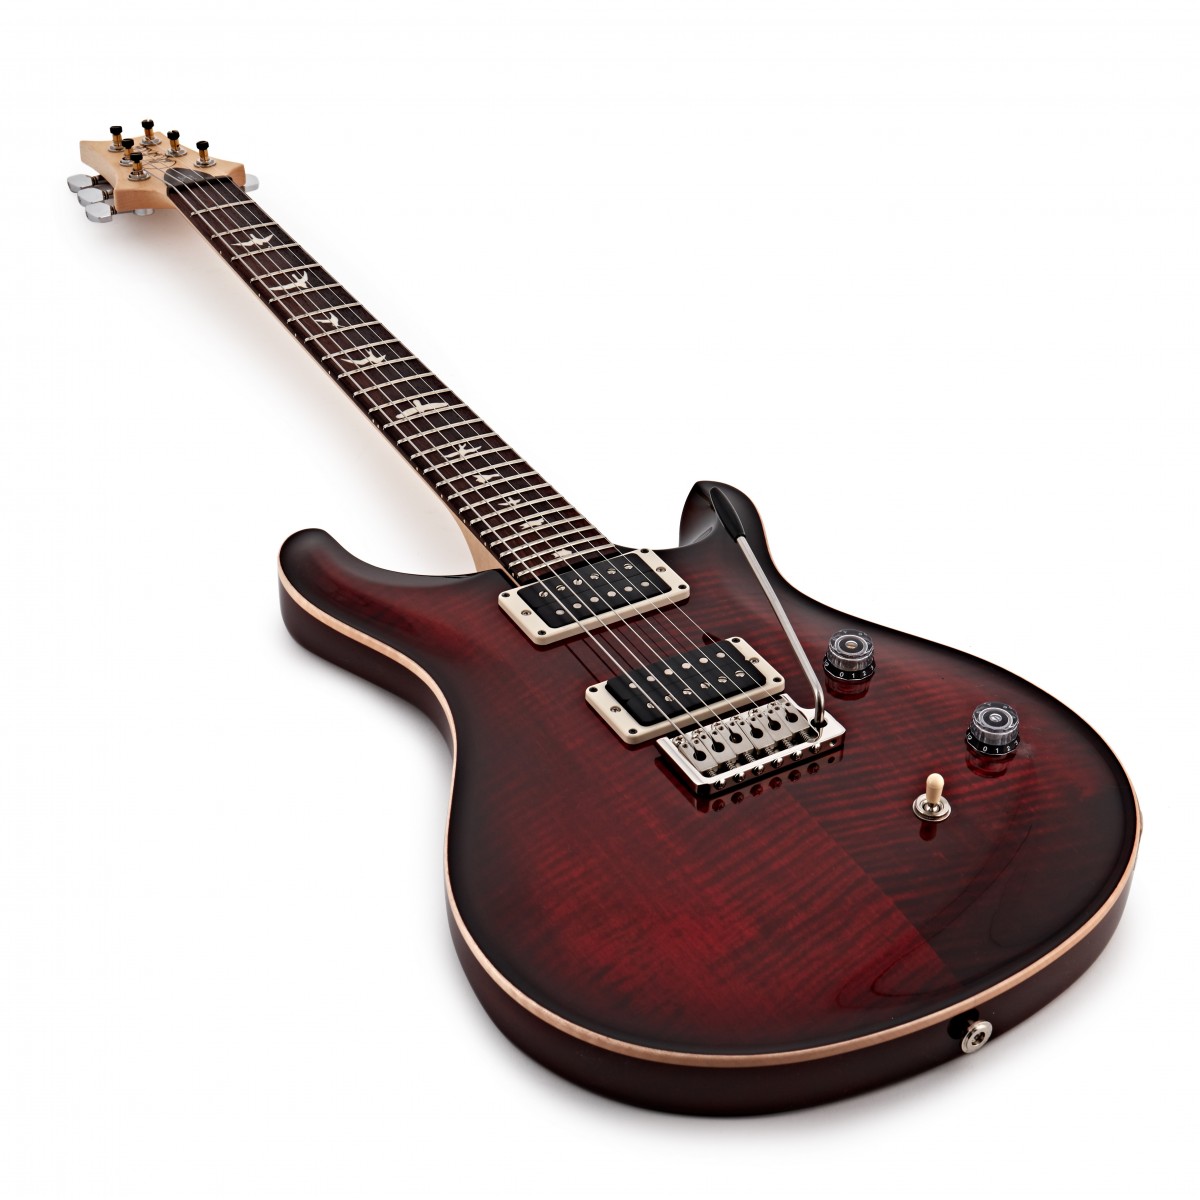 Prs Ce 24 Bolt-on Usa Hh Trem Rw - Fire Red Burst - Double cut electric guitar - Variation 2